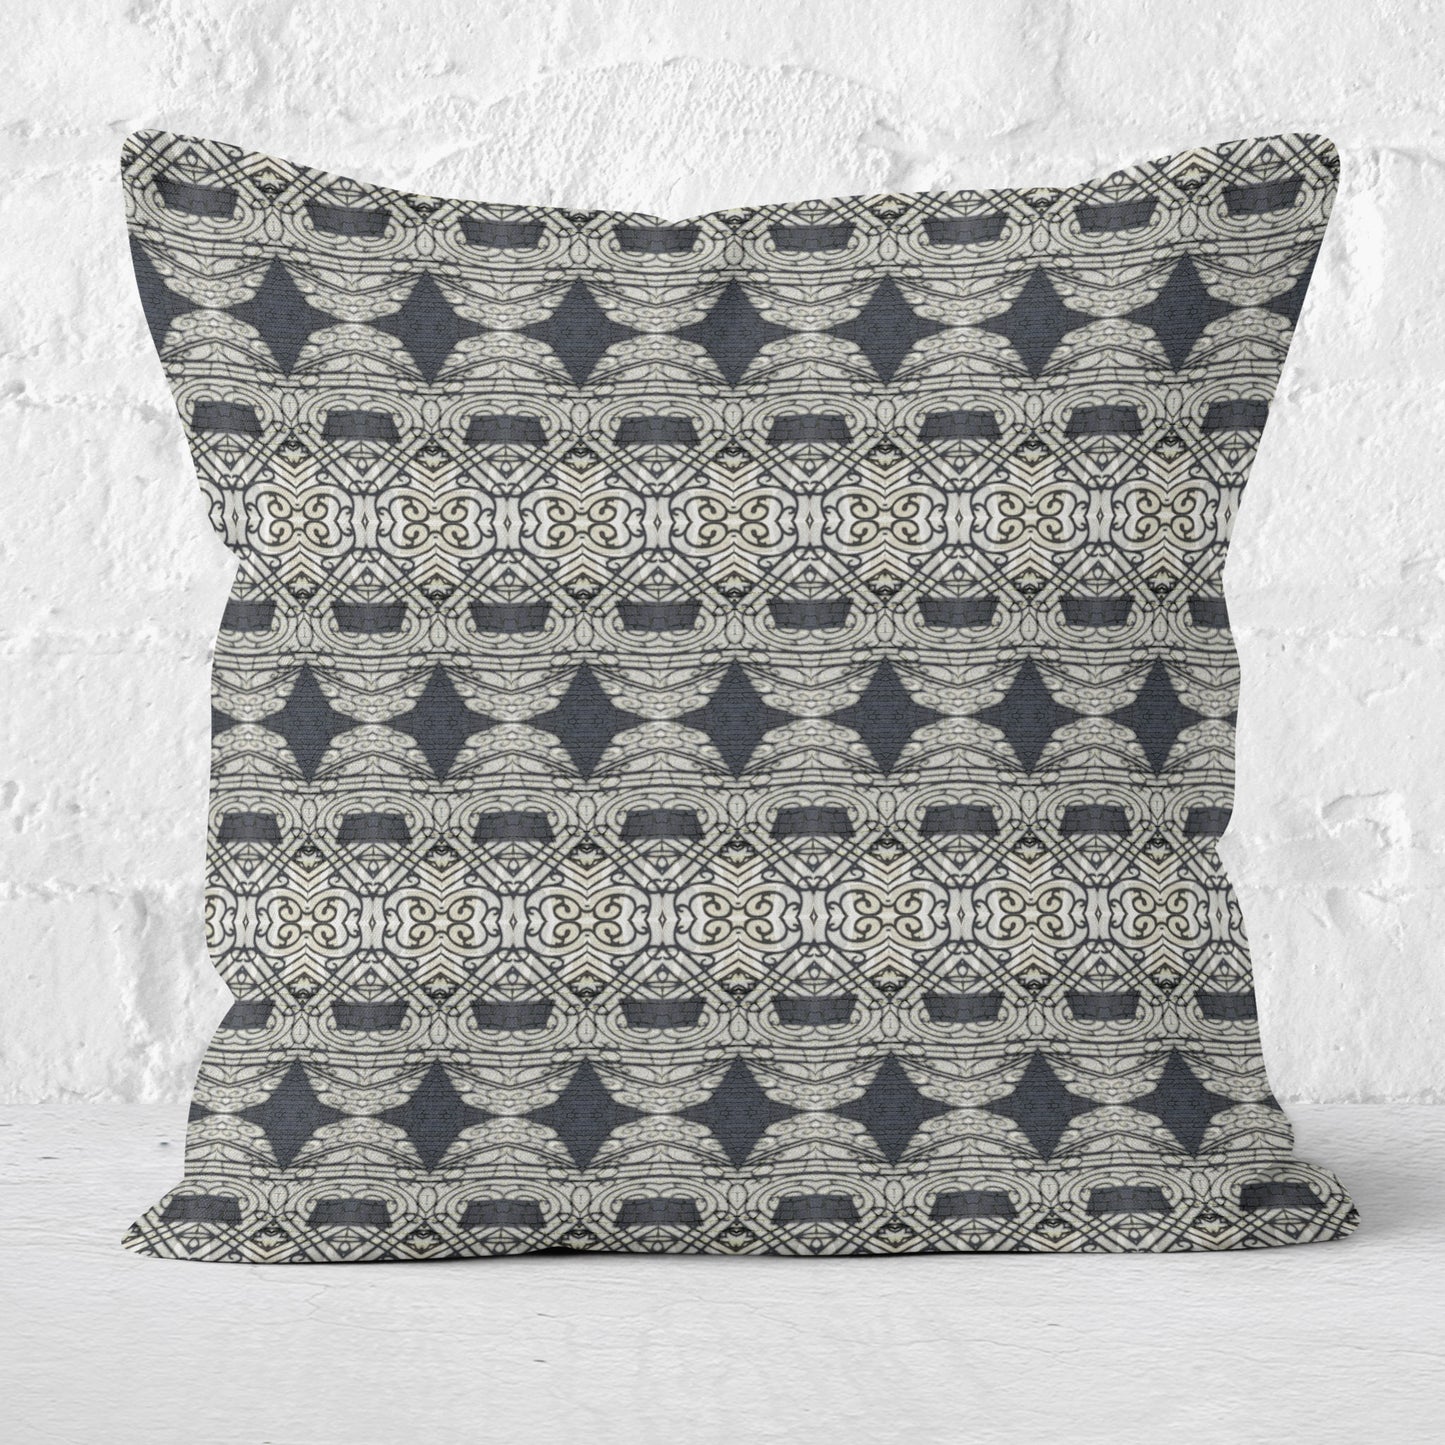 Square throw pillow featuring an abstract and ornate pattern in black and grey tones sitting in front of a white brick wall